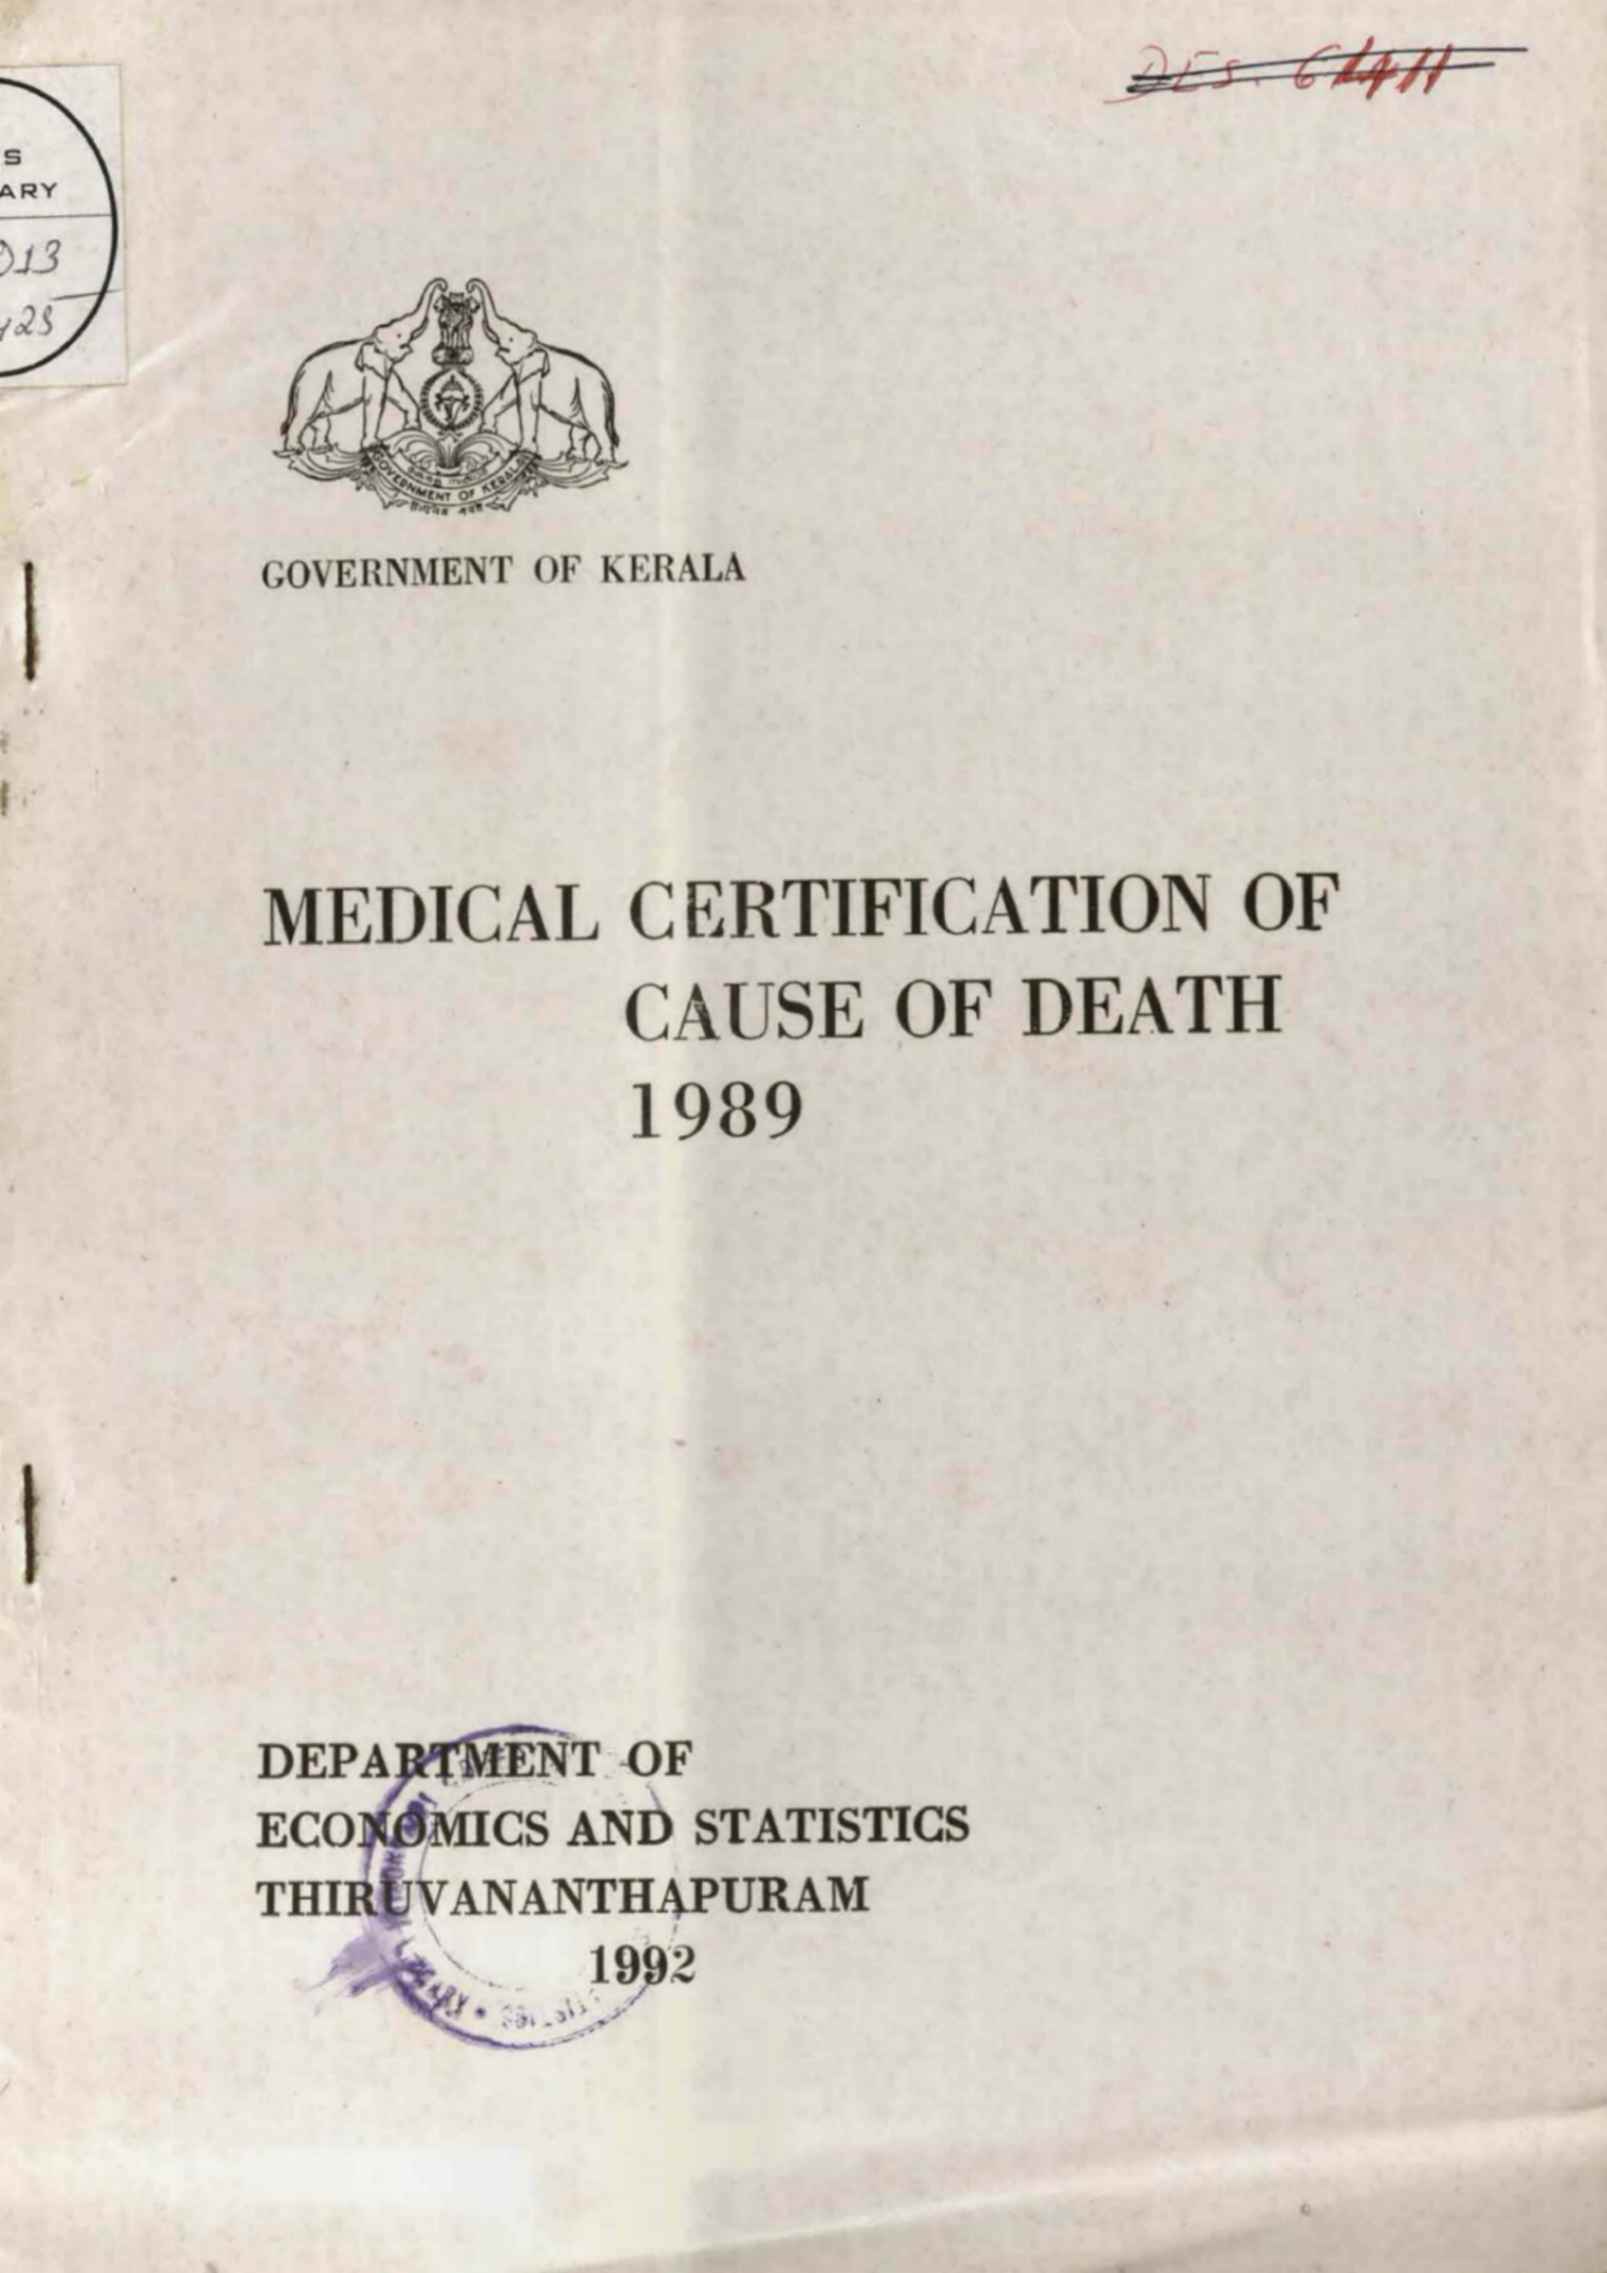 MEDICAL CERTIFICATION OF CAUSE OF DEATH 1989